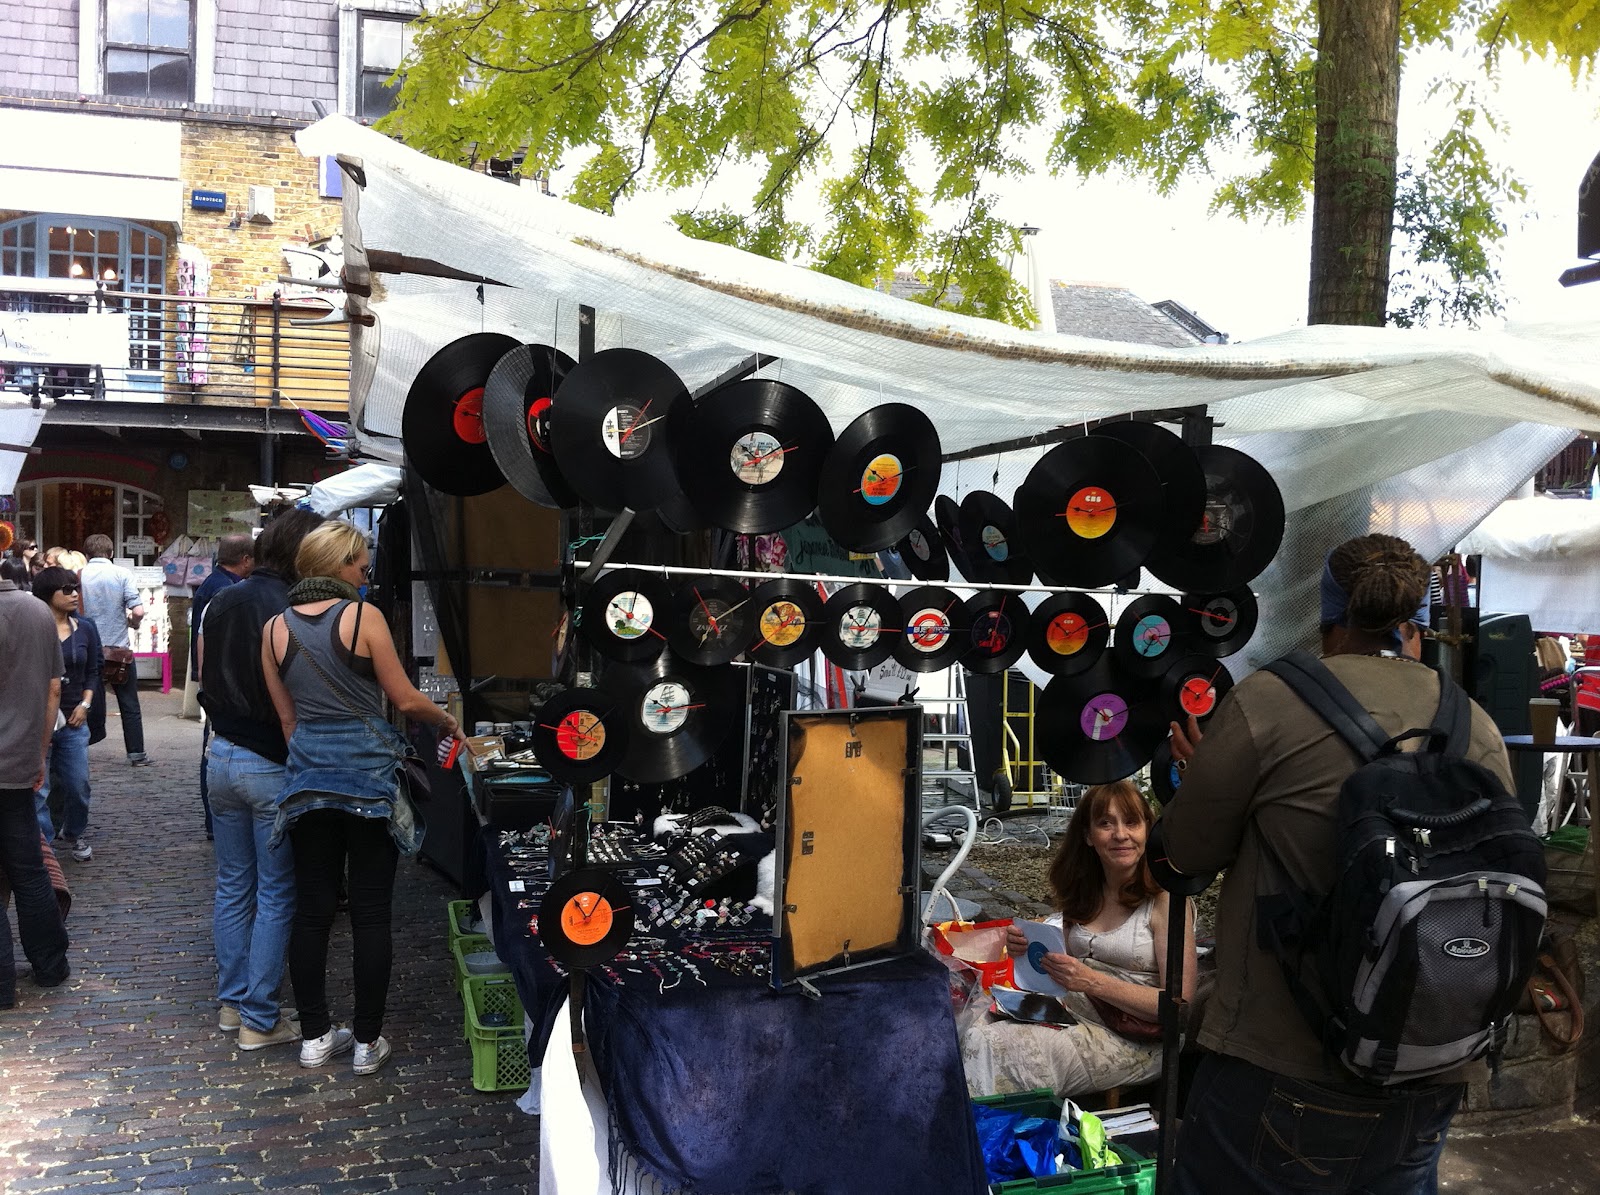 32 Rpm The Camden Market Experience Feat Out On The Floor Records